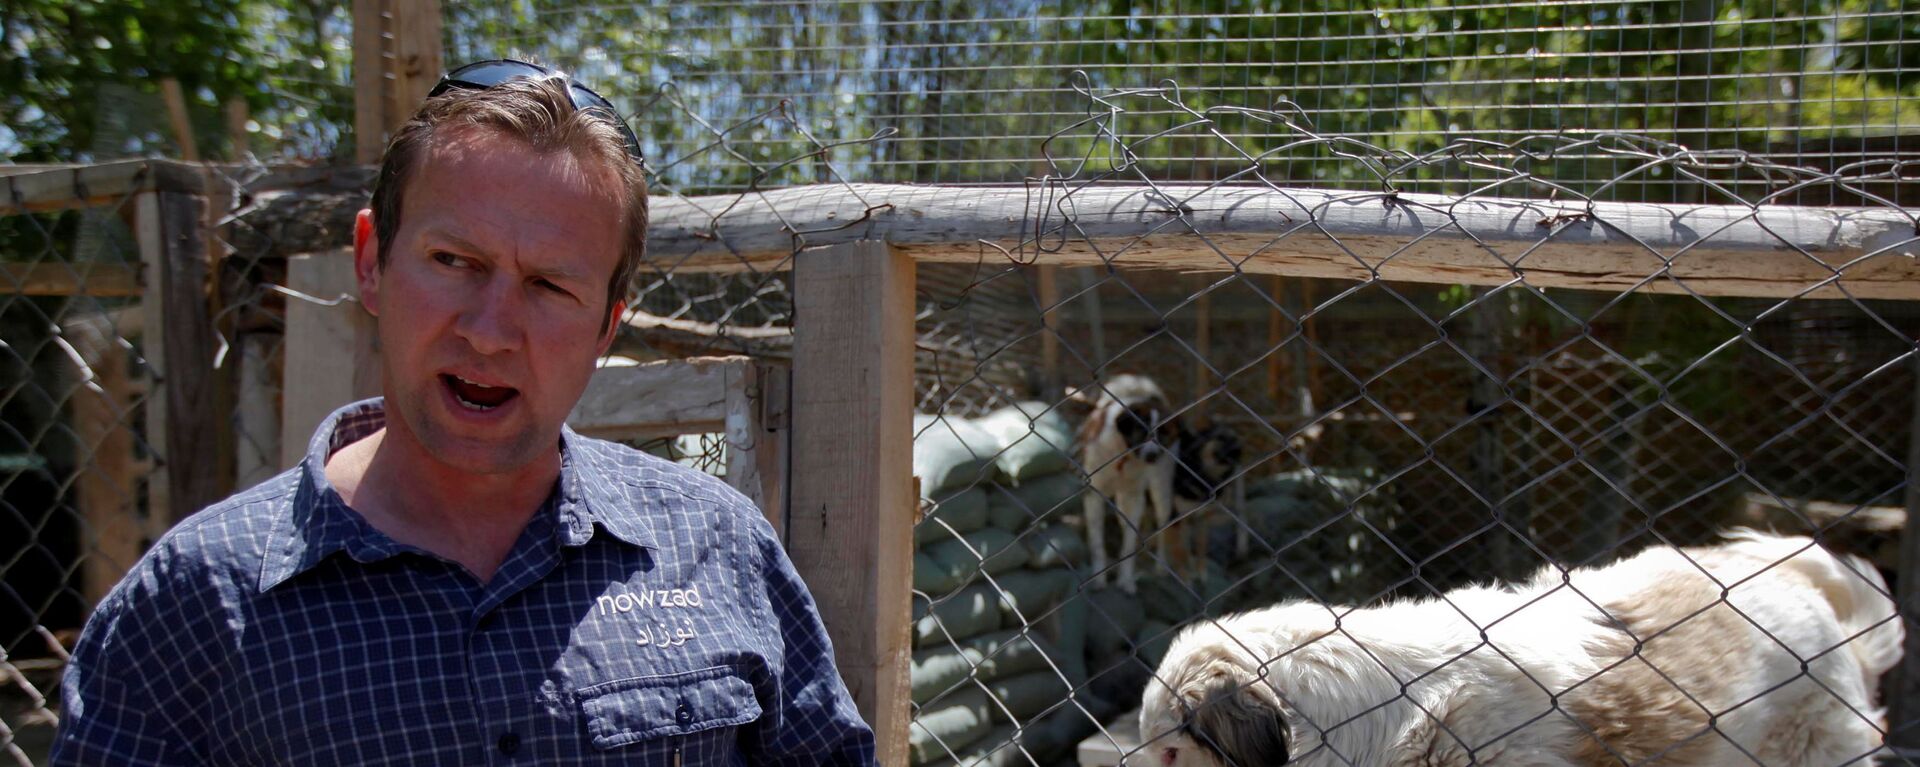 Pen Farthing, founder of British charity Nowzad, an animal shelter, stands in front of a cage on the outskirts of Kabul May 1, 2012 - Sputnik International, 1920, 30.08.2021